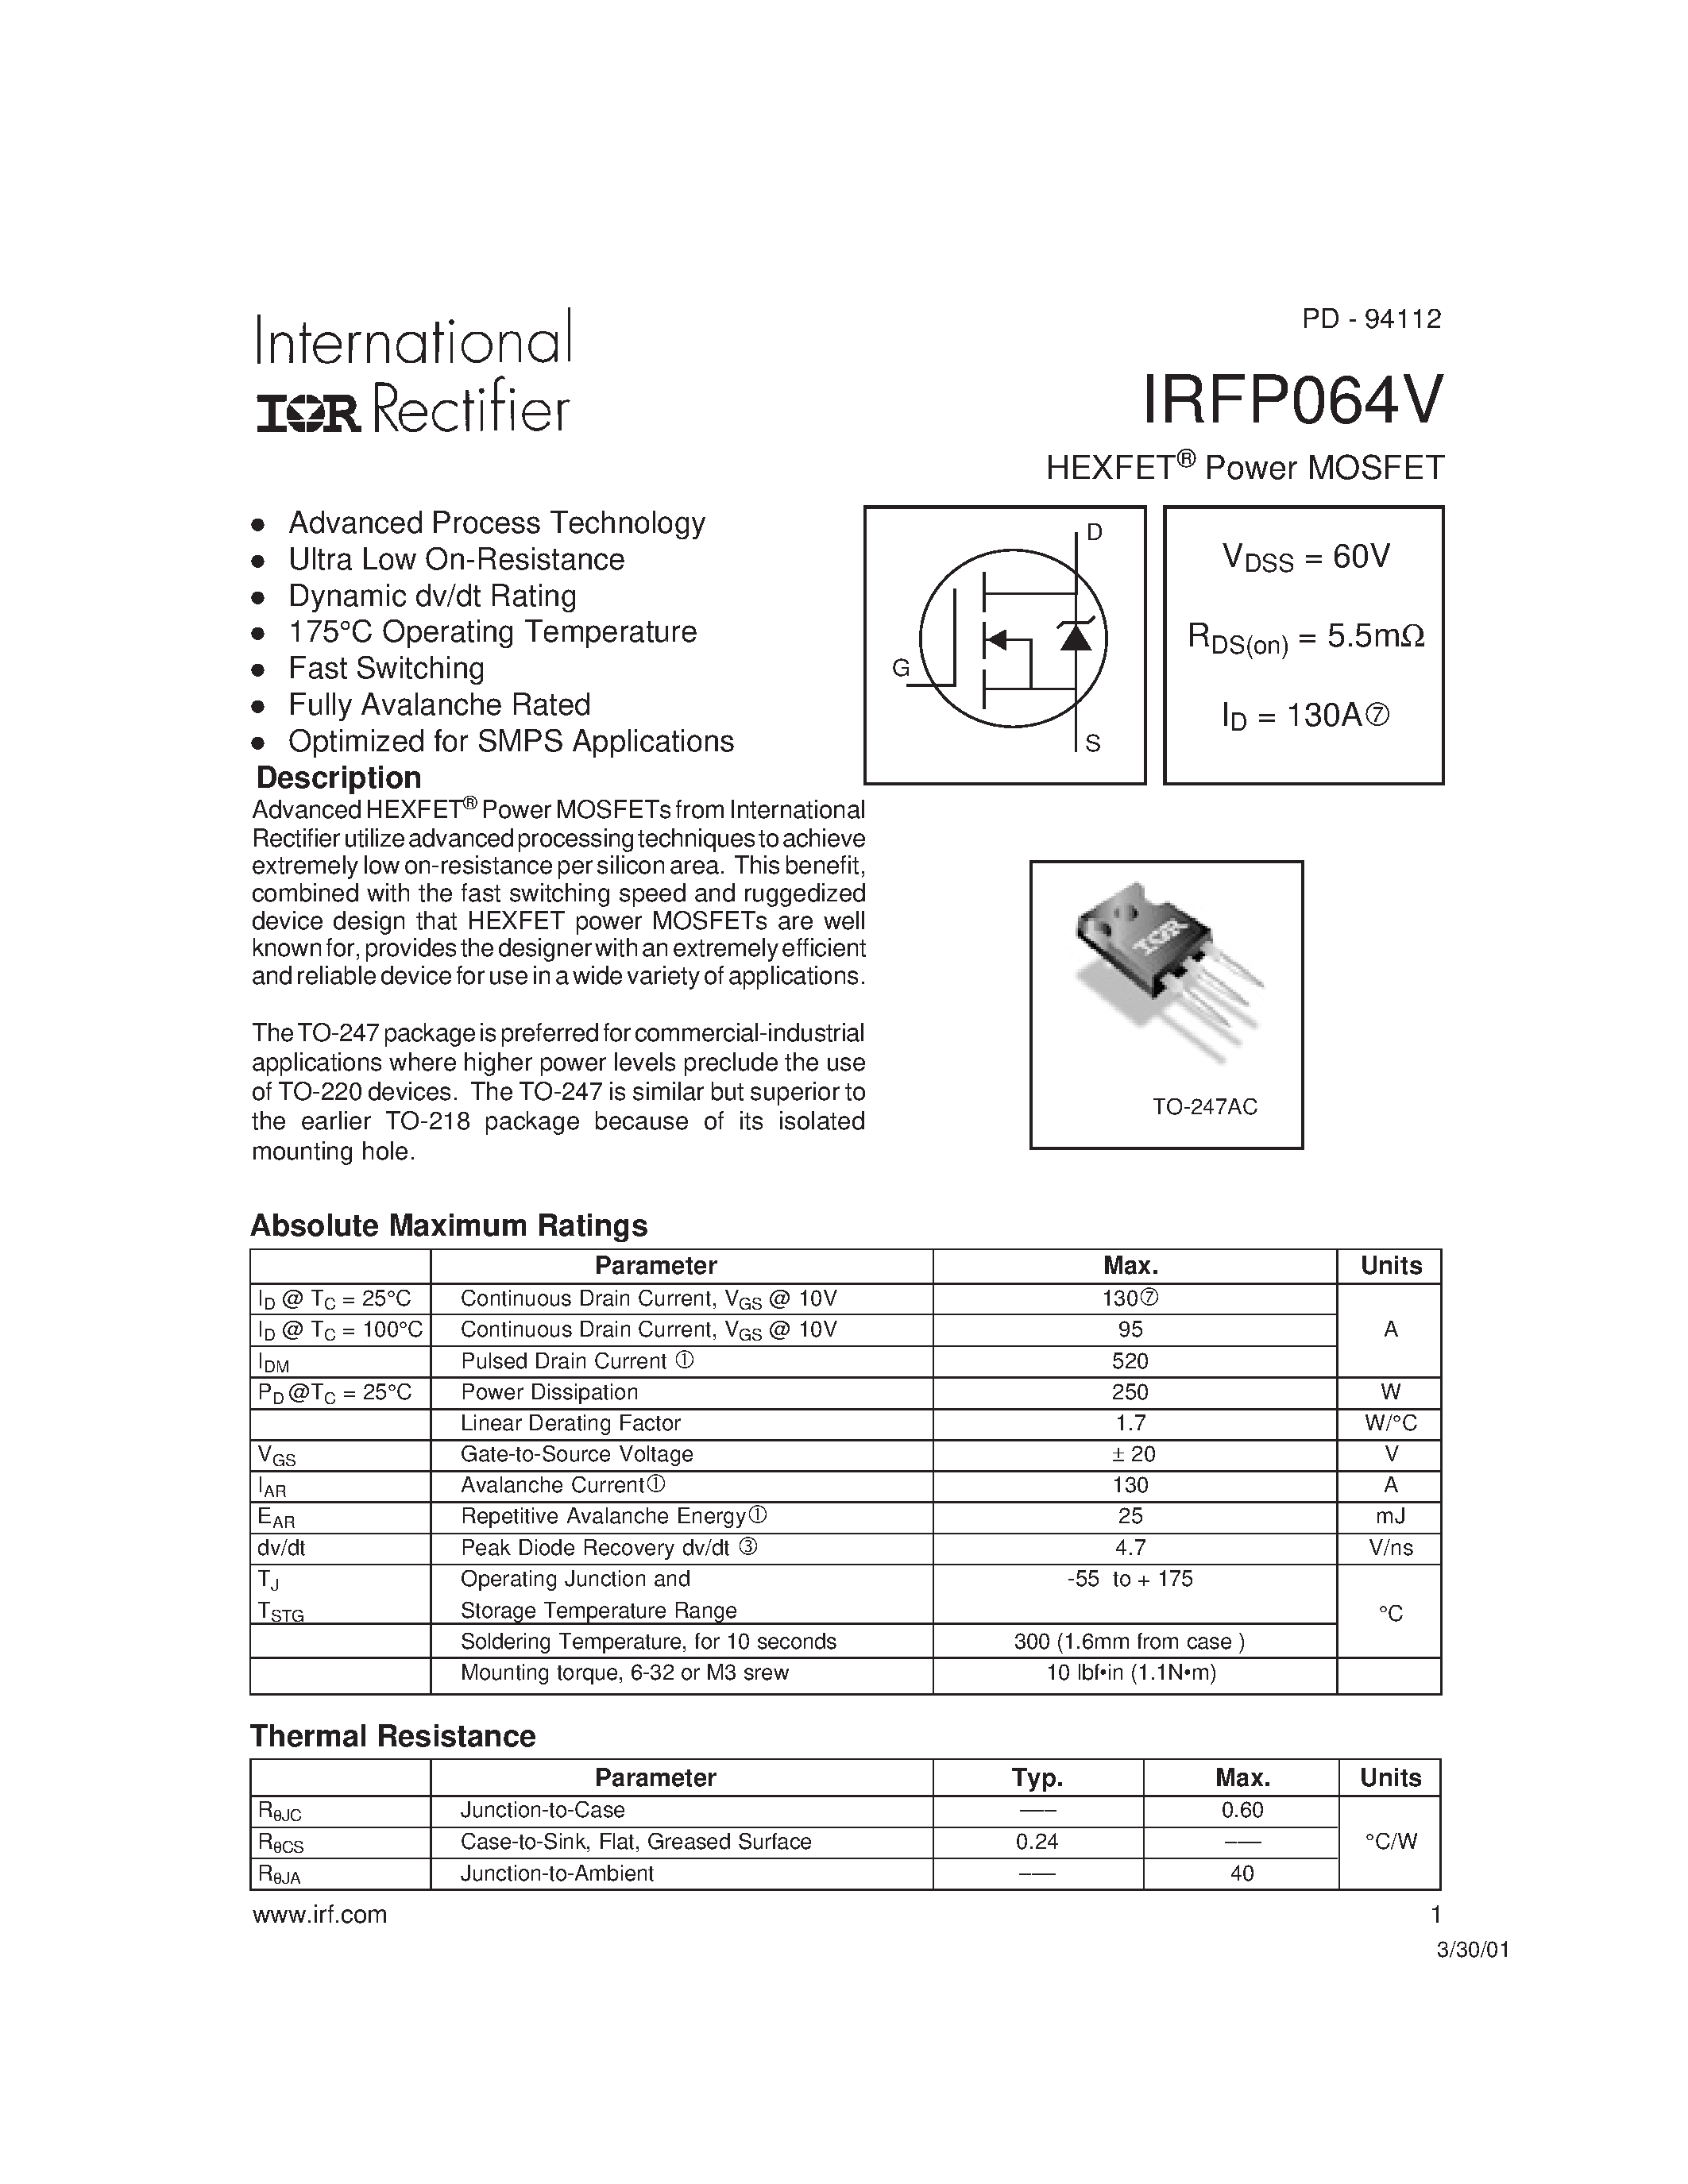 Datasheet IRFP064V - Power MOSFET page 1